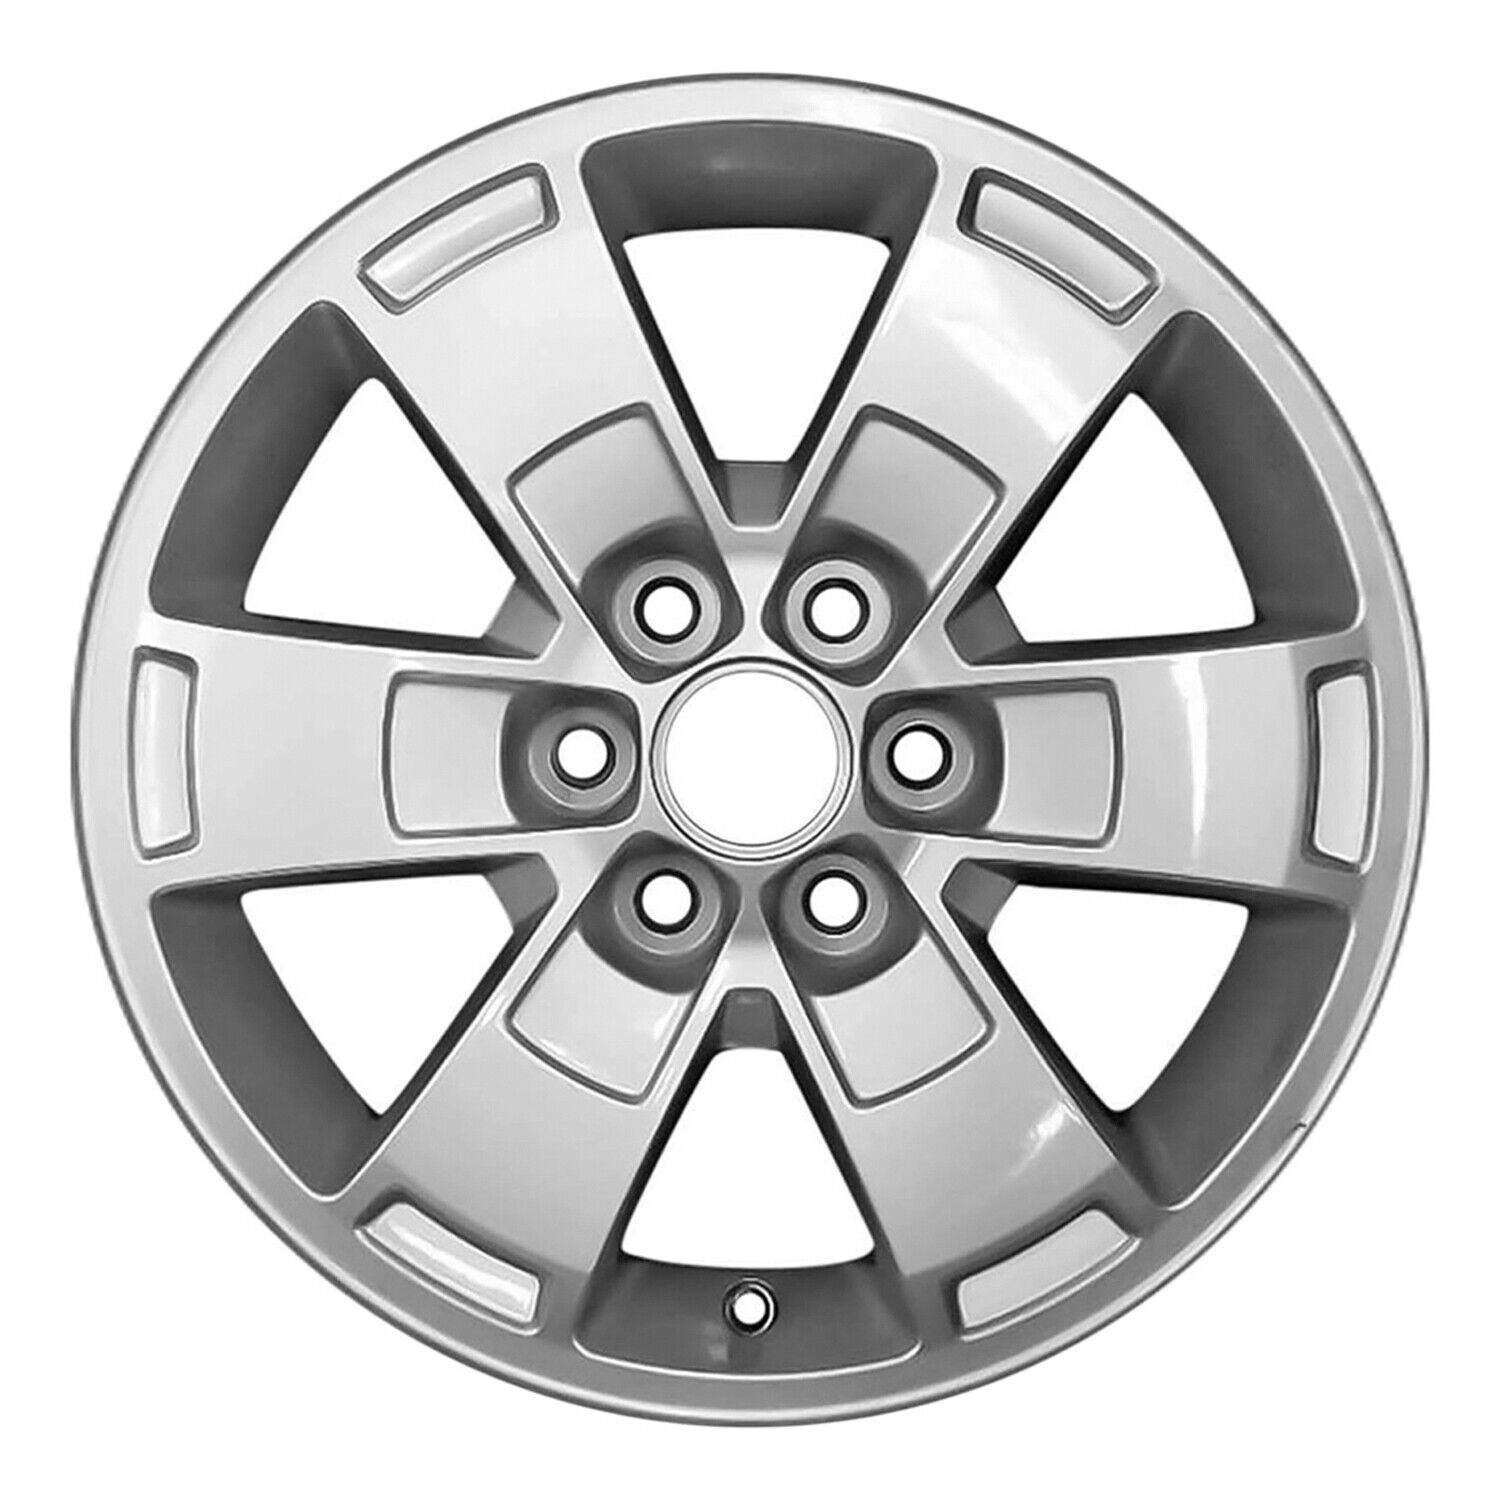 05670 Reconditioned OEM Aluminum Wheel 16x7 fits 2015-2020 GMC Canyon